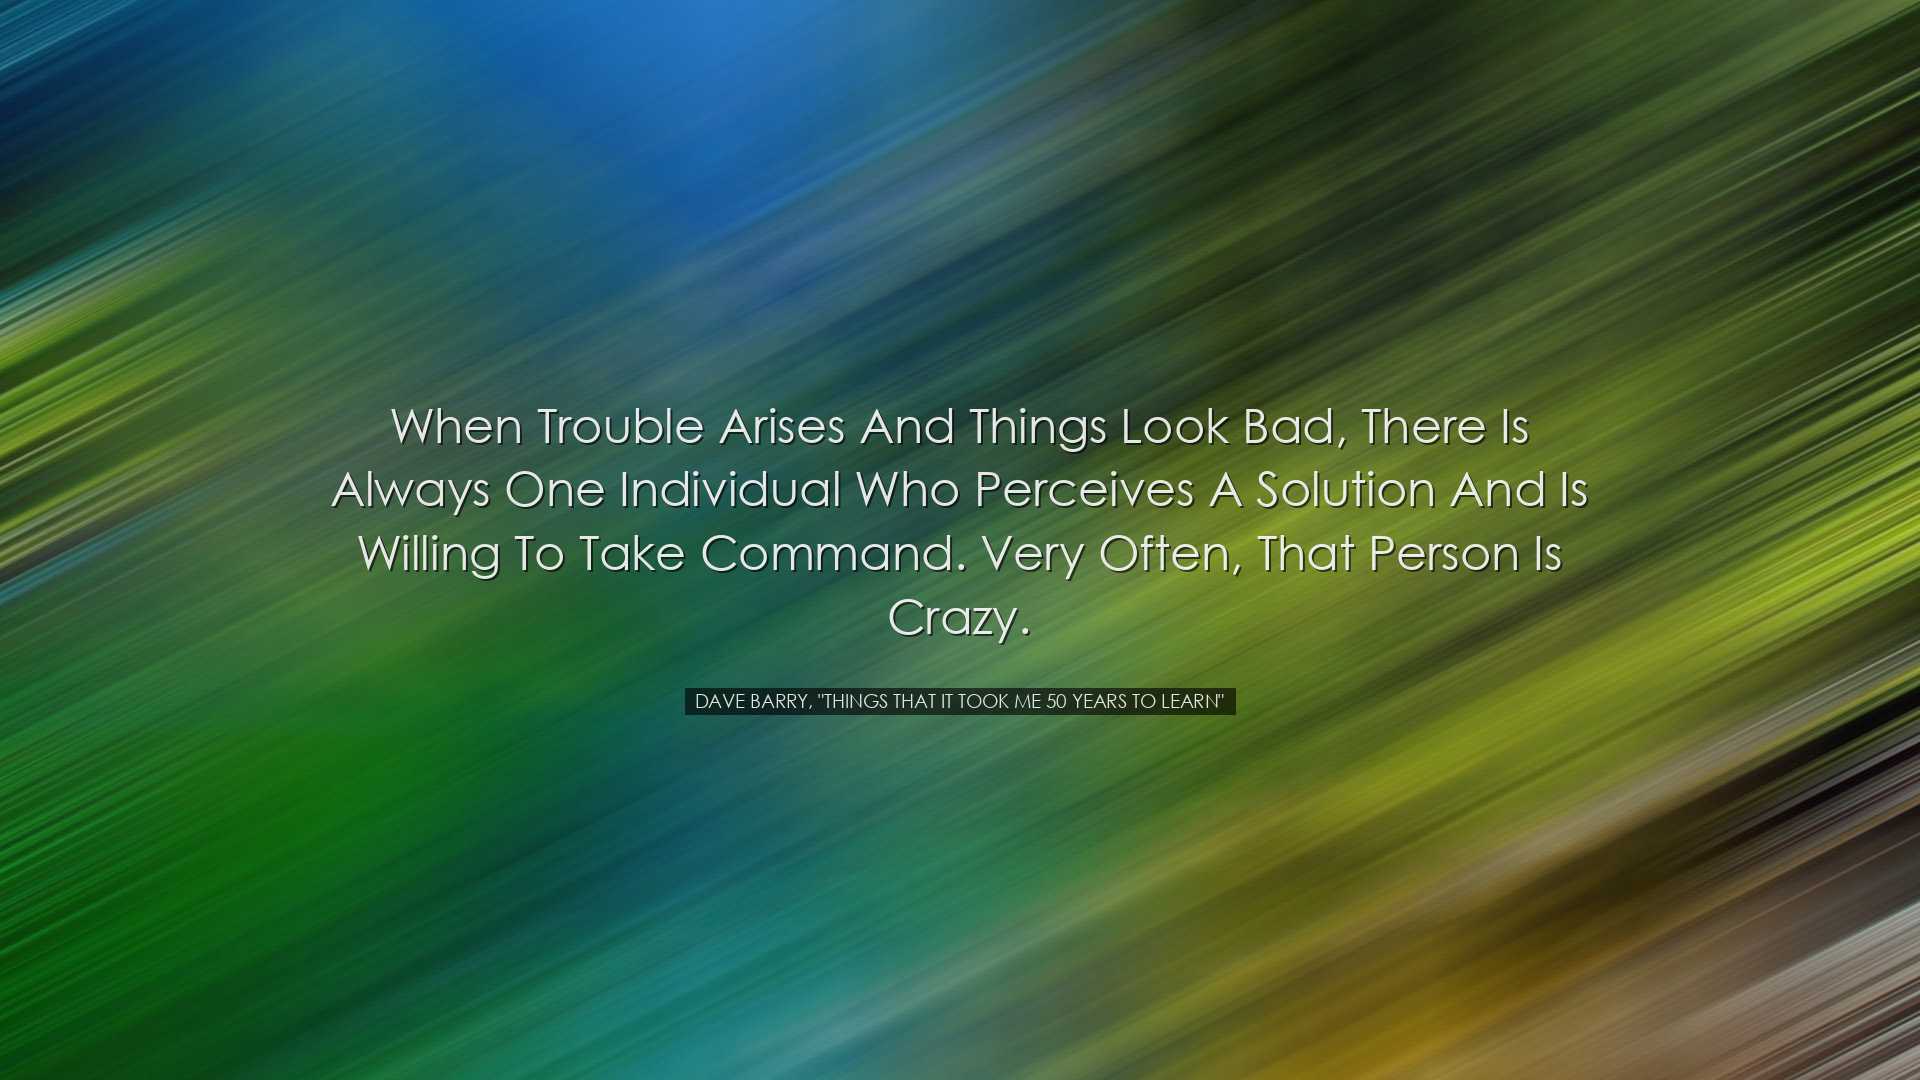 When trouble arises and things look bad, there is always one indiv